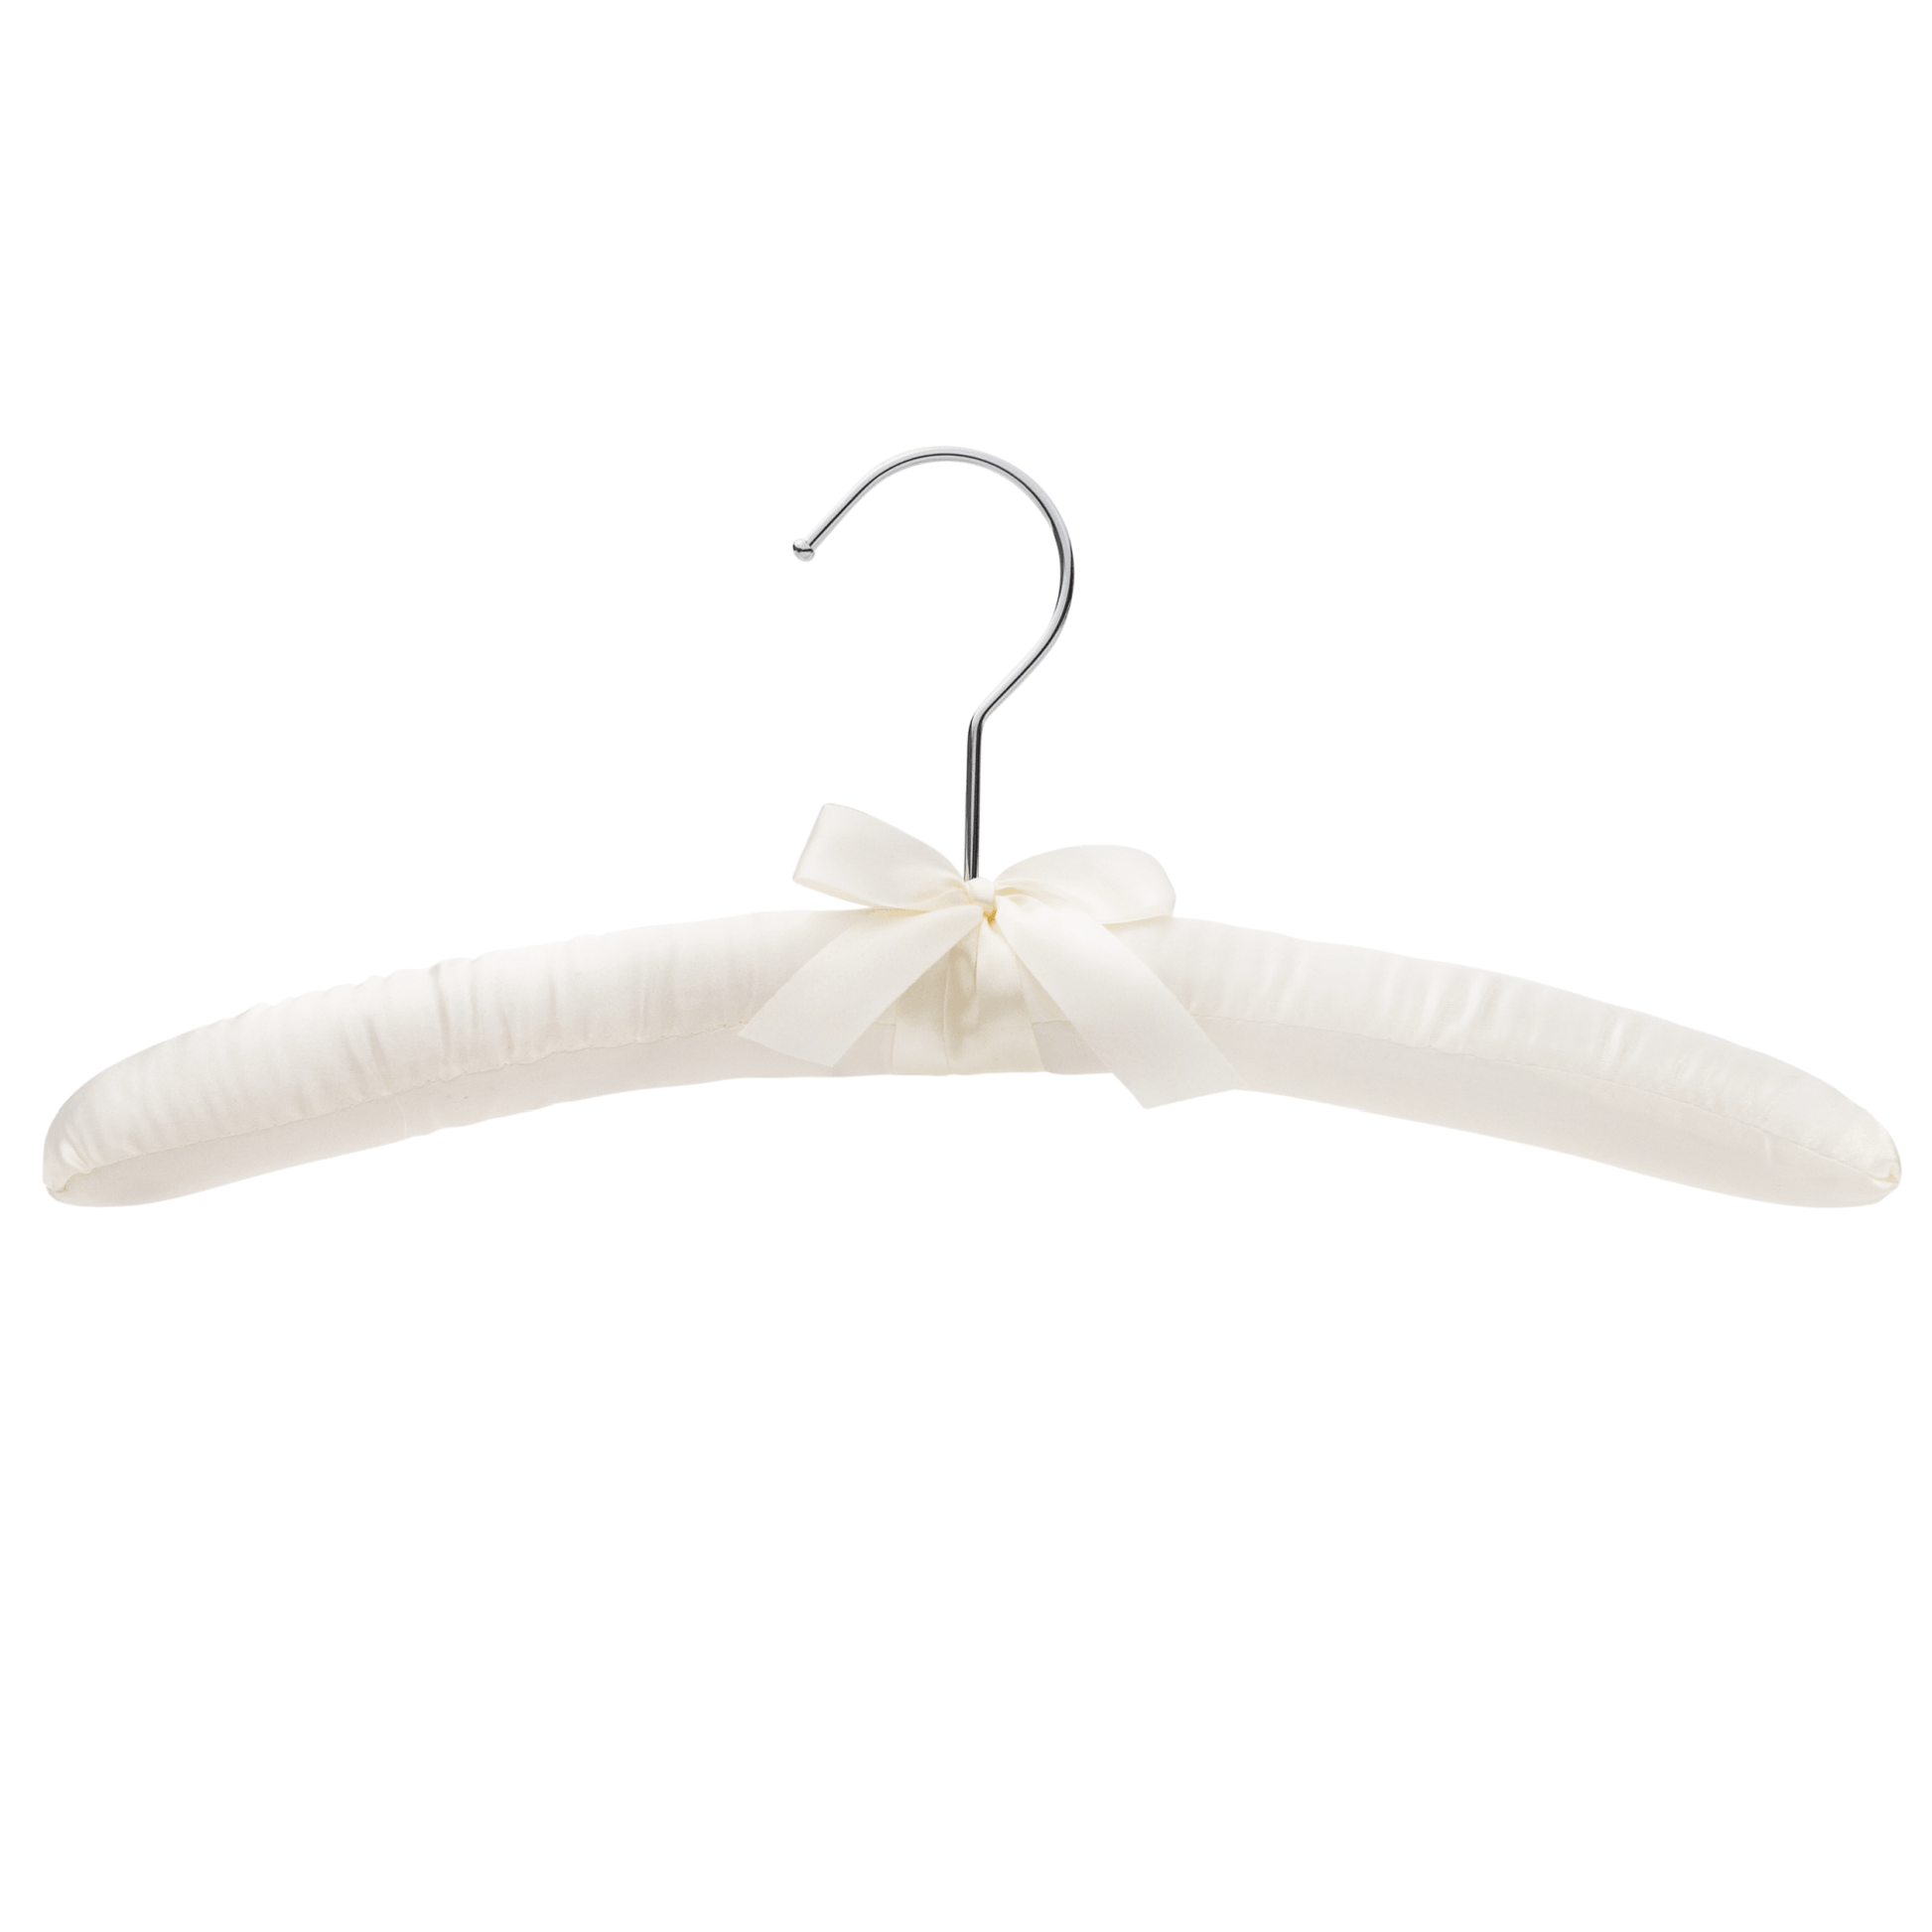 Padded Coat Hangers With Chrome Hook - Ivory - 38cm X 45mm Thick (Sold in Bundles of 20/50) - Hangersforless